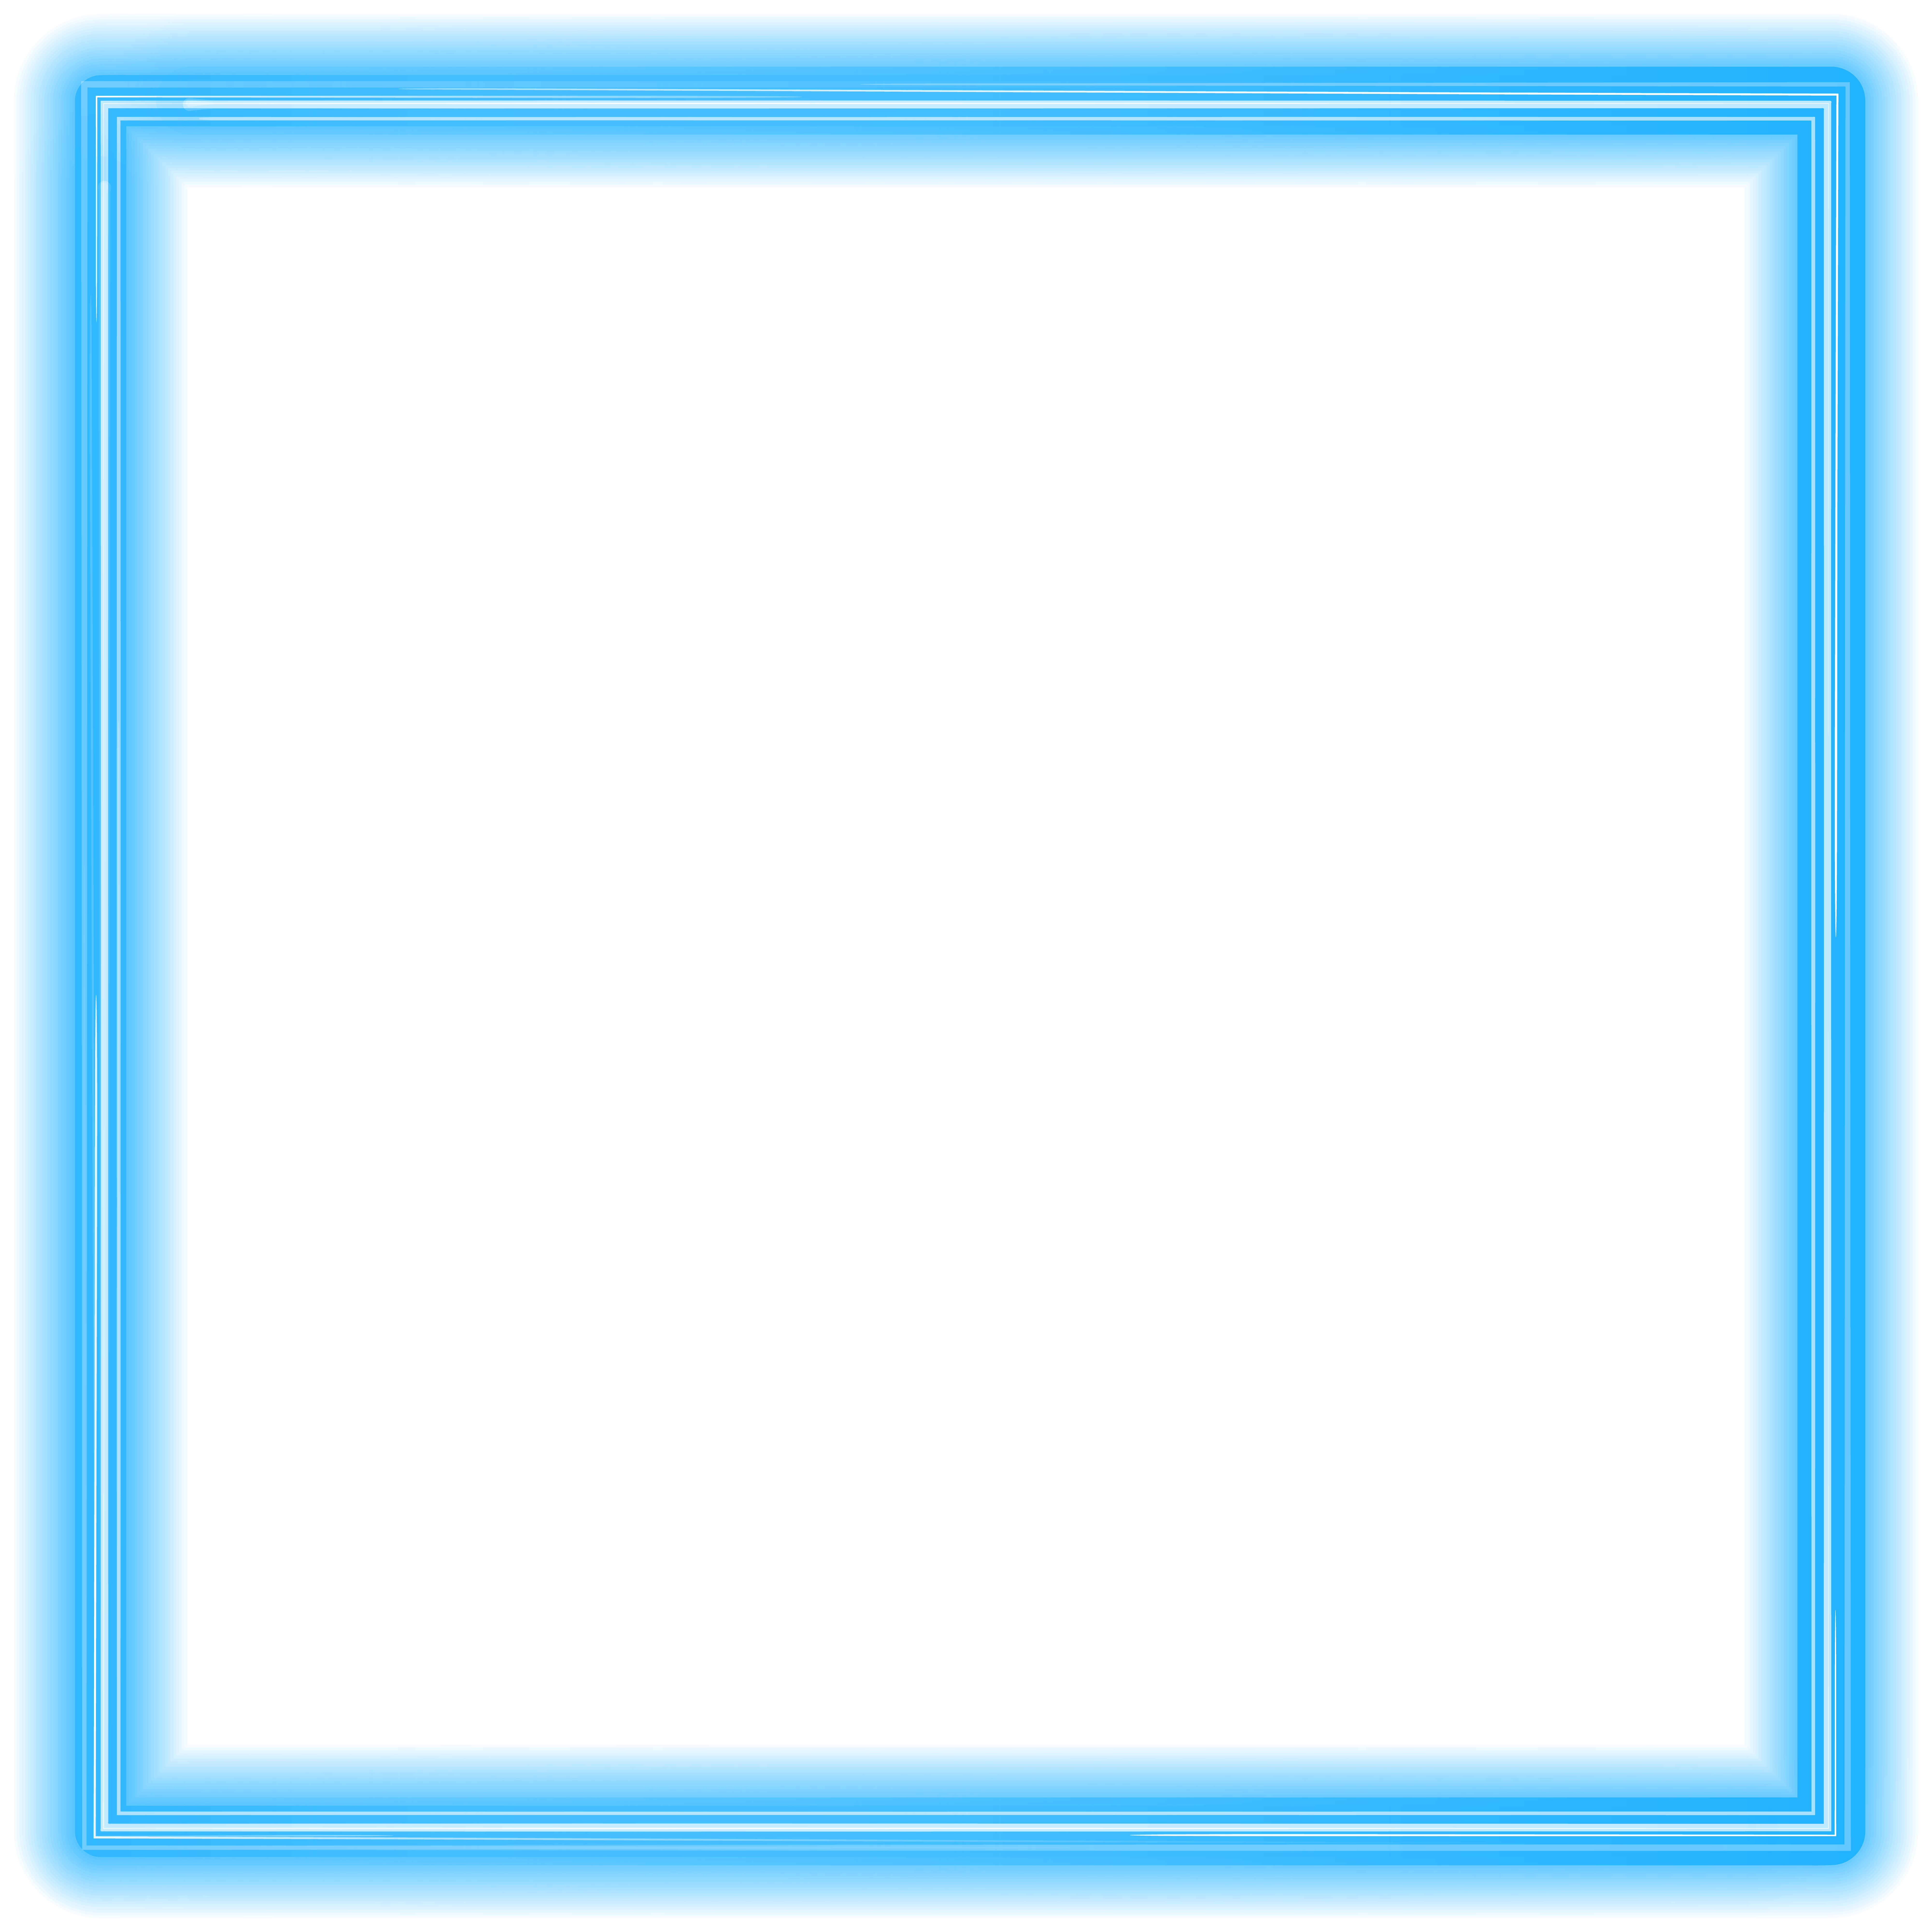 Blue Neon Border Frame PNG Clipart​-Quality Free Image and Transparent PNG Clipart